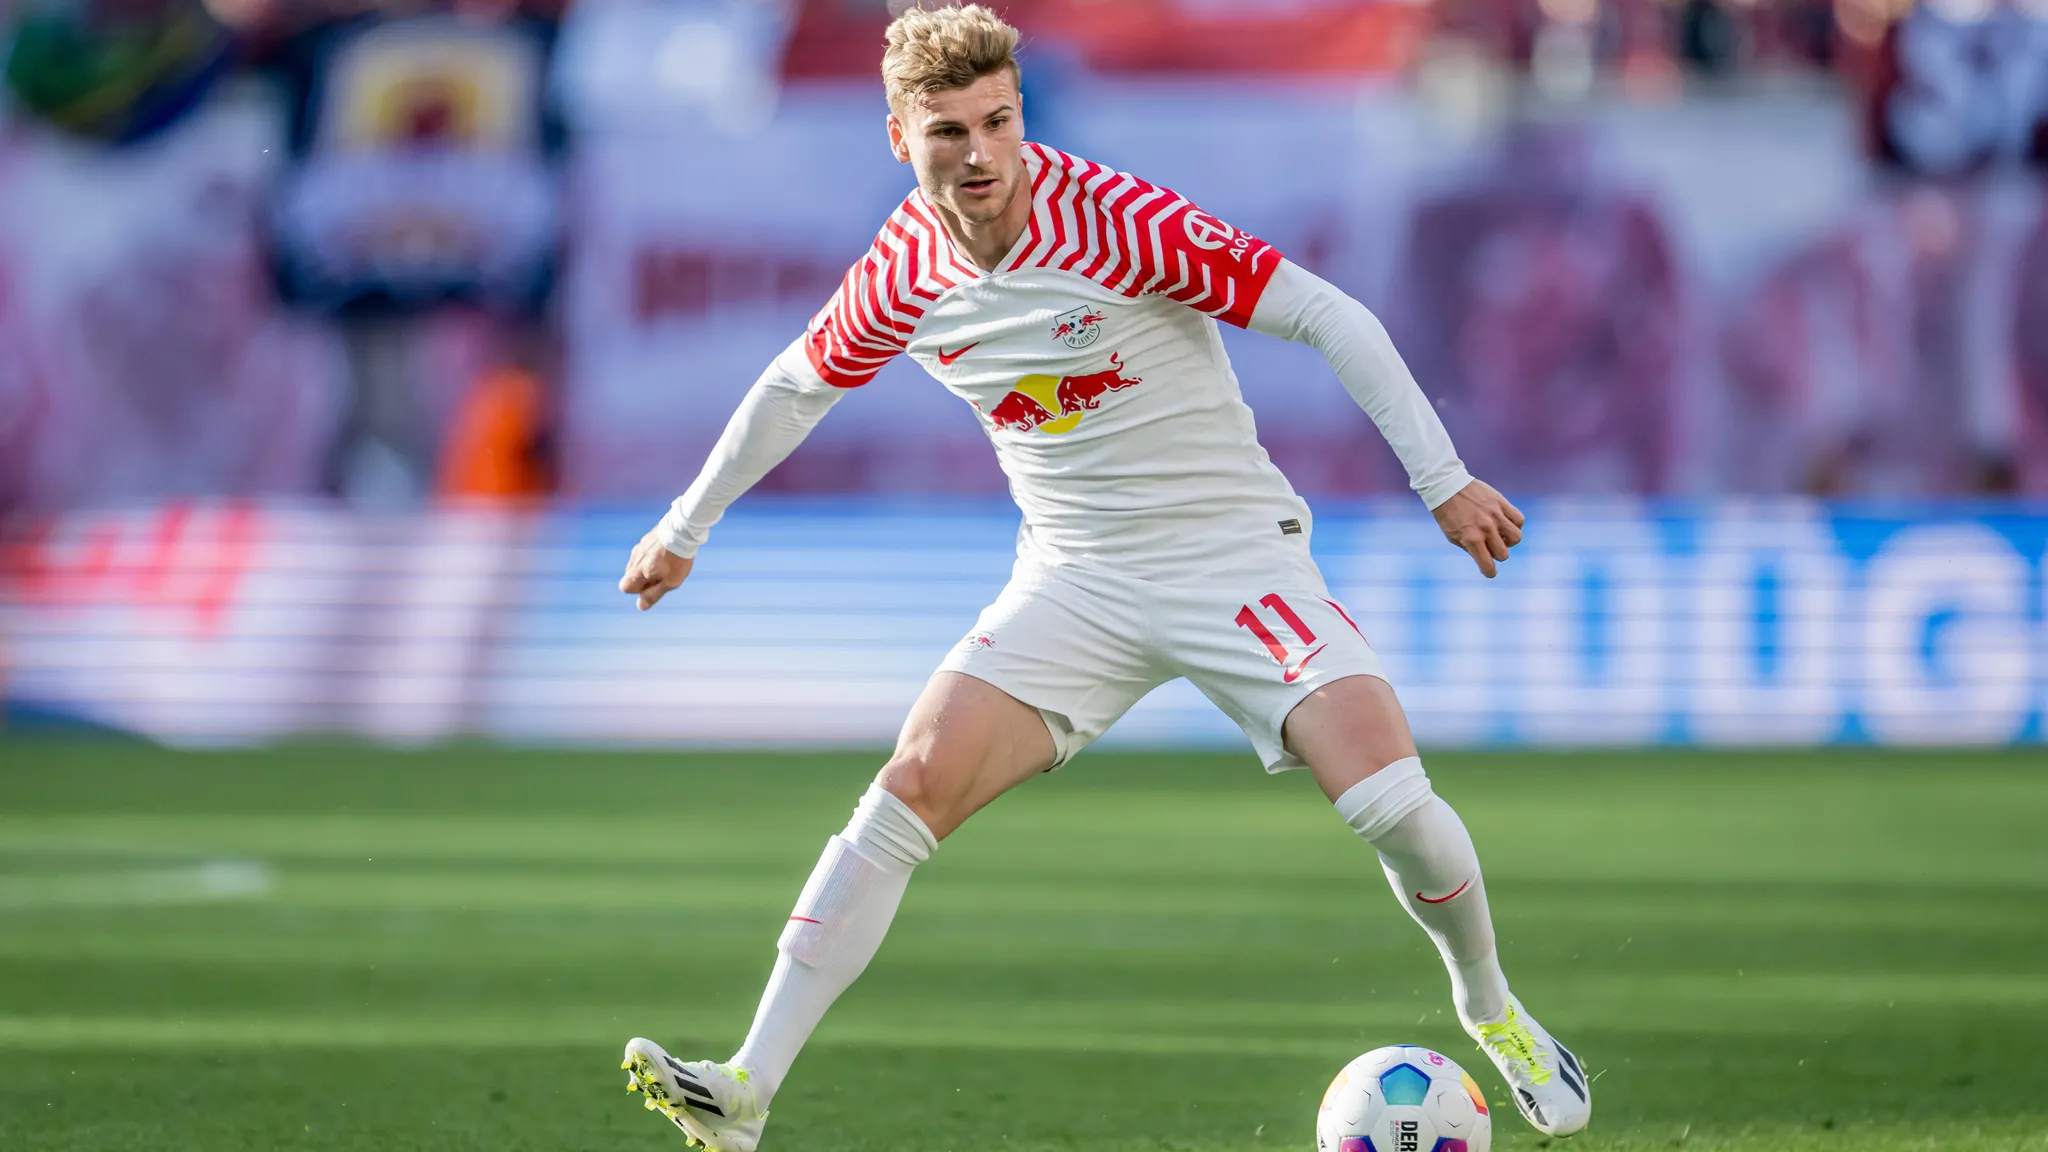 Timo Werner playing for RB Leipzig.